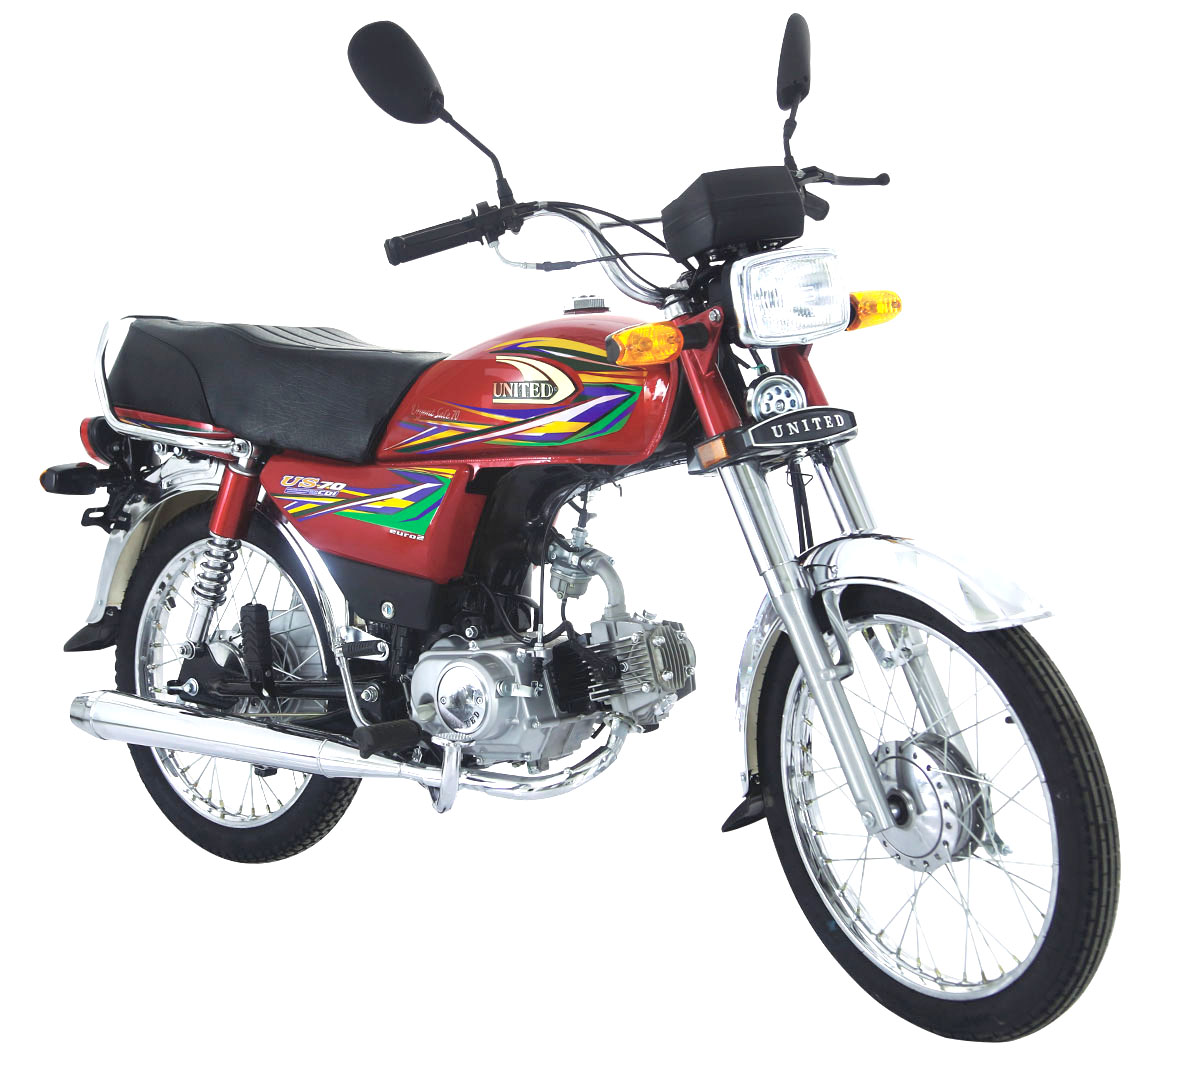 United Motorcycle 70cc price in Pakistan 2020